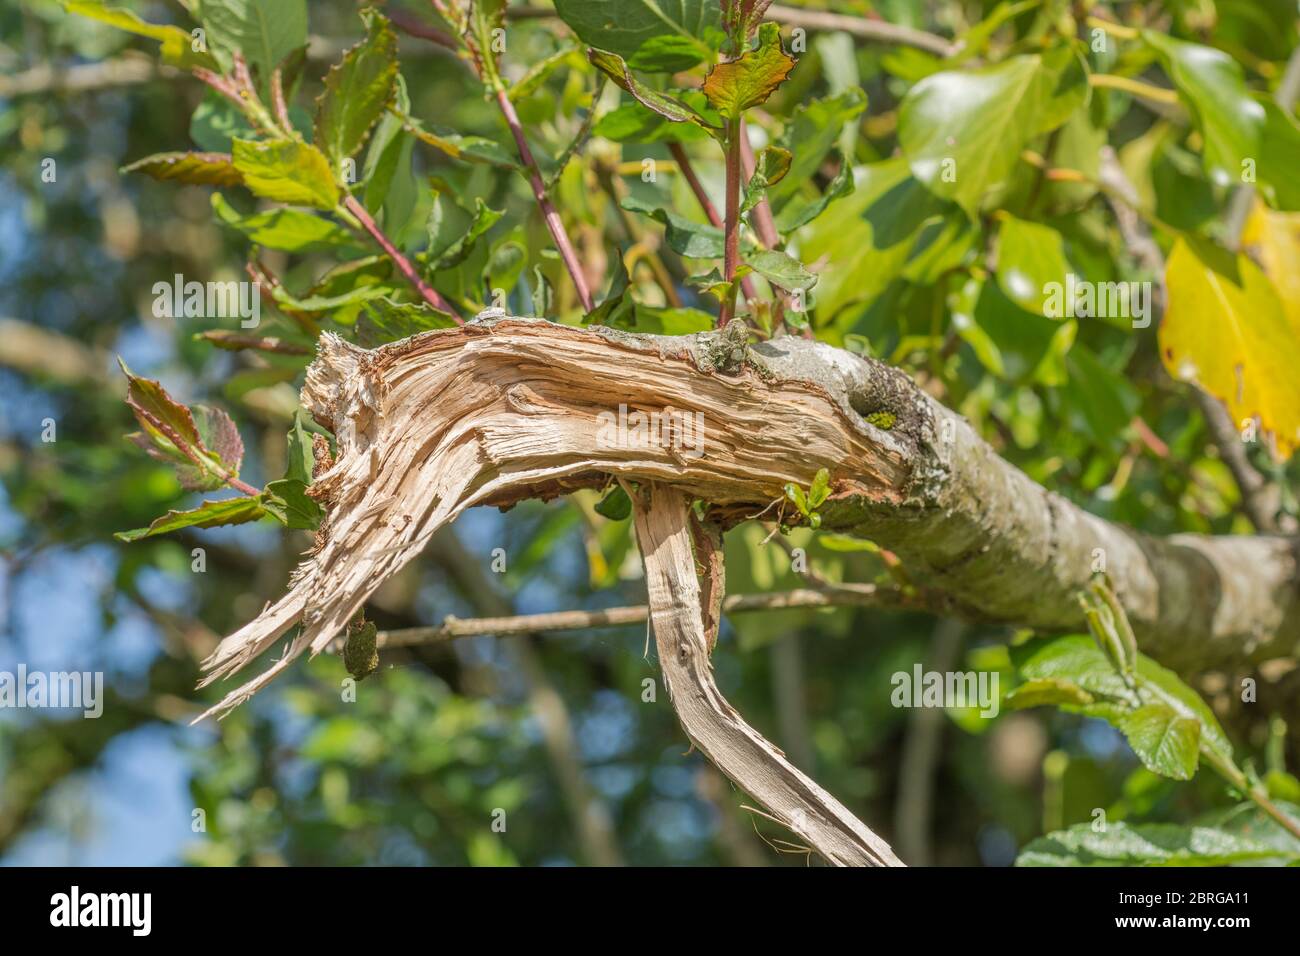 Example of mechanized hedge cutting with a flail, where smaller shrub & tree species branches are severed rather than cut by the flailing process. Stock Photo